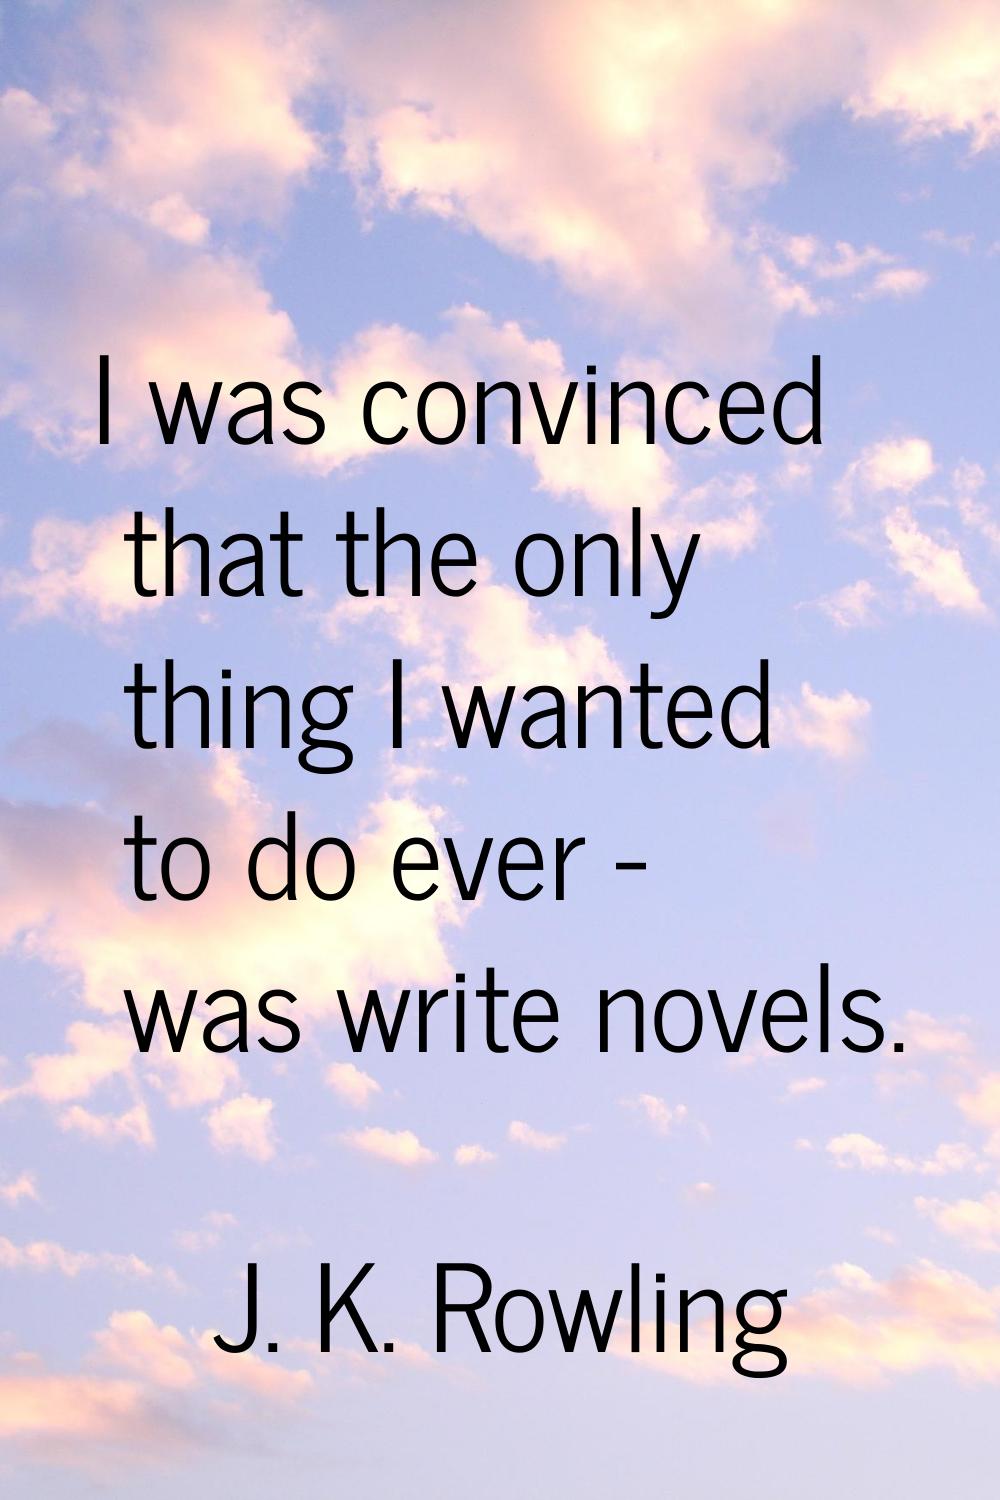 I was convinced that the only thing I wanted to do ever - was write novels.